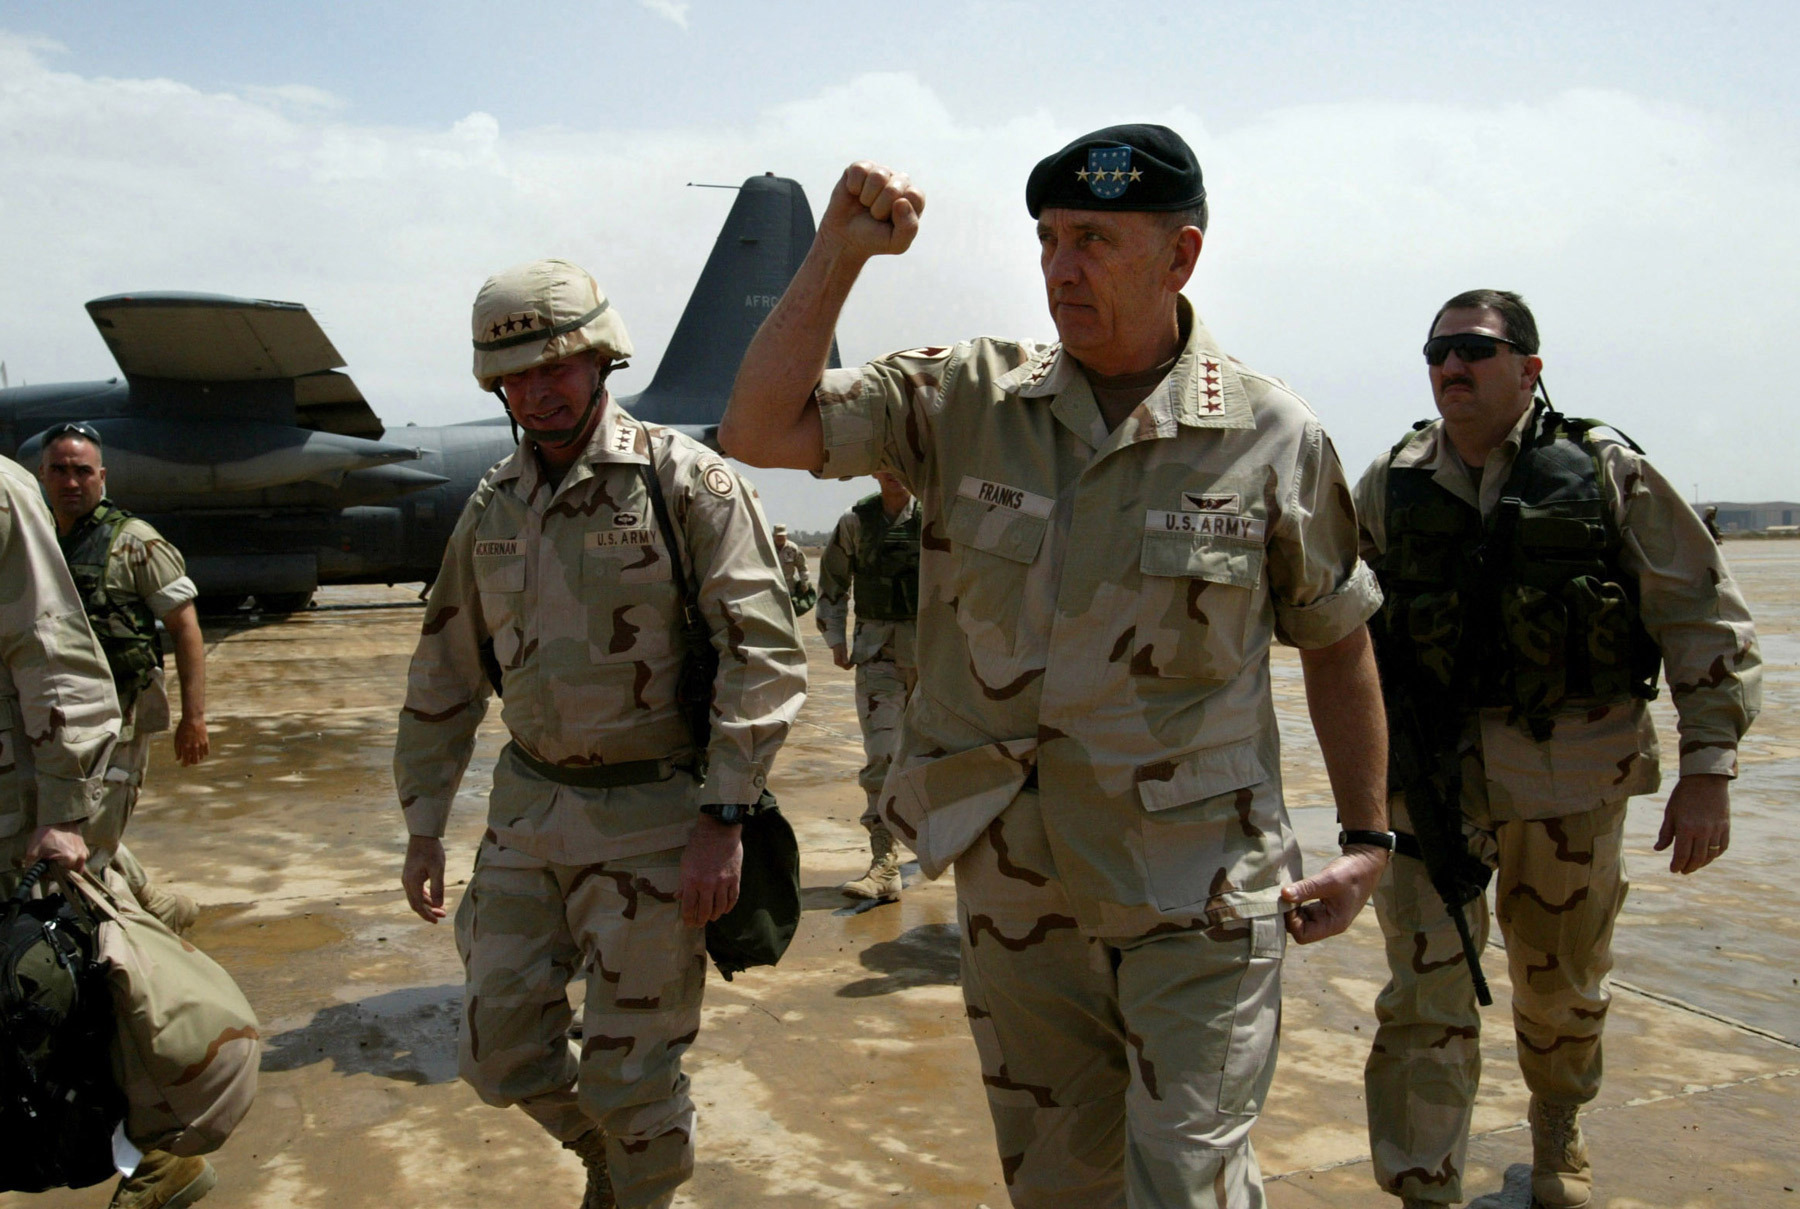 Romney campaign enlists over 300 military generals